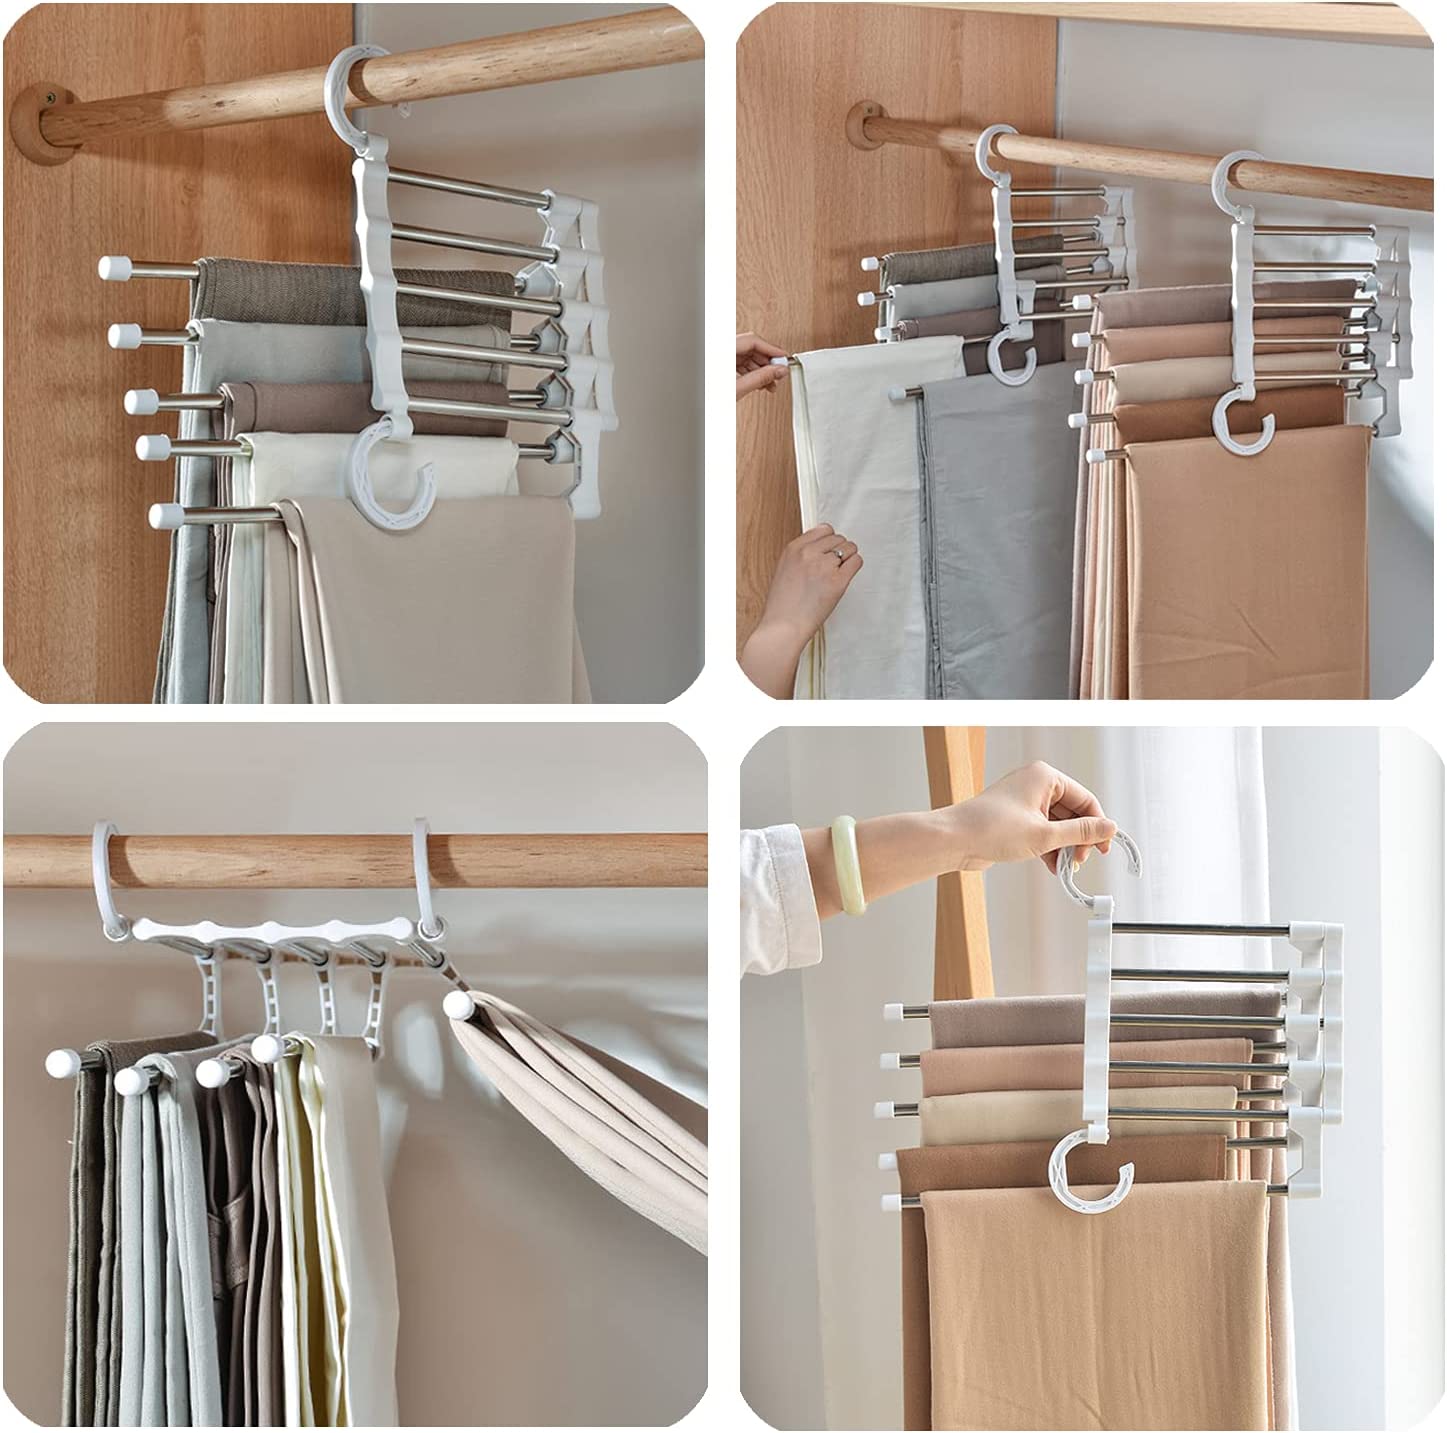 2 Pack Stainless Steel Adjustable 5 in 1 Pants Hangers Non-Slip Space Saving for Home Storage | Auzzi Store